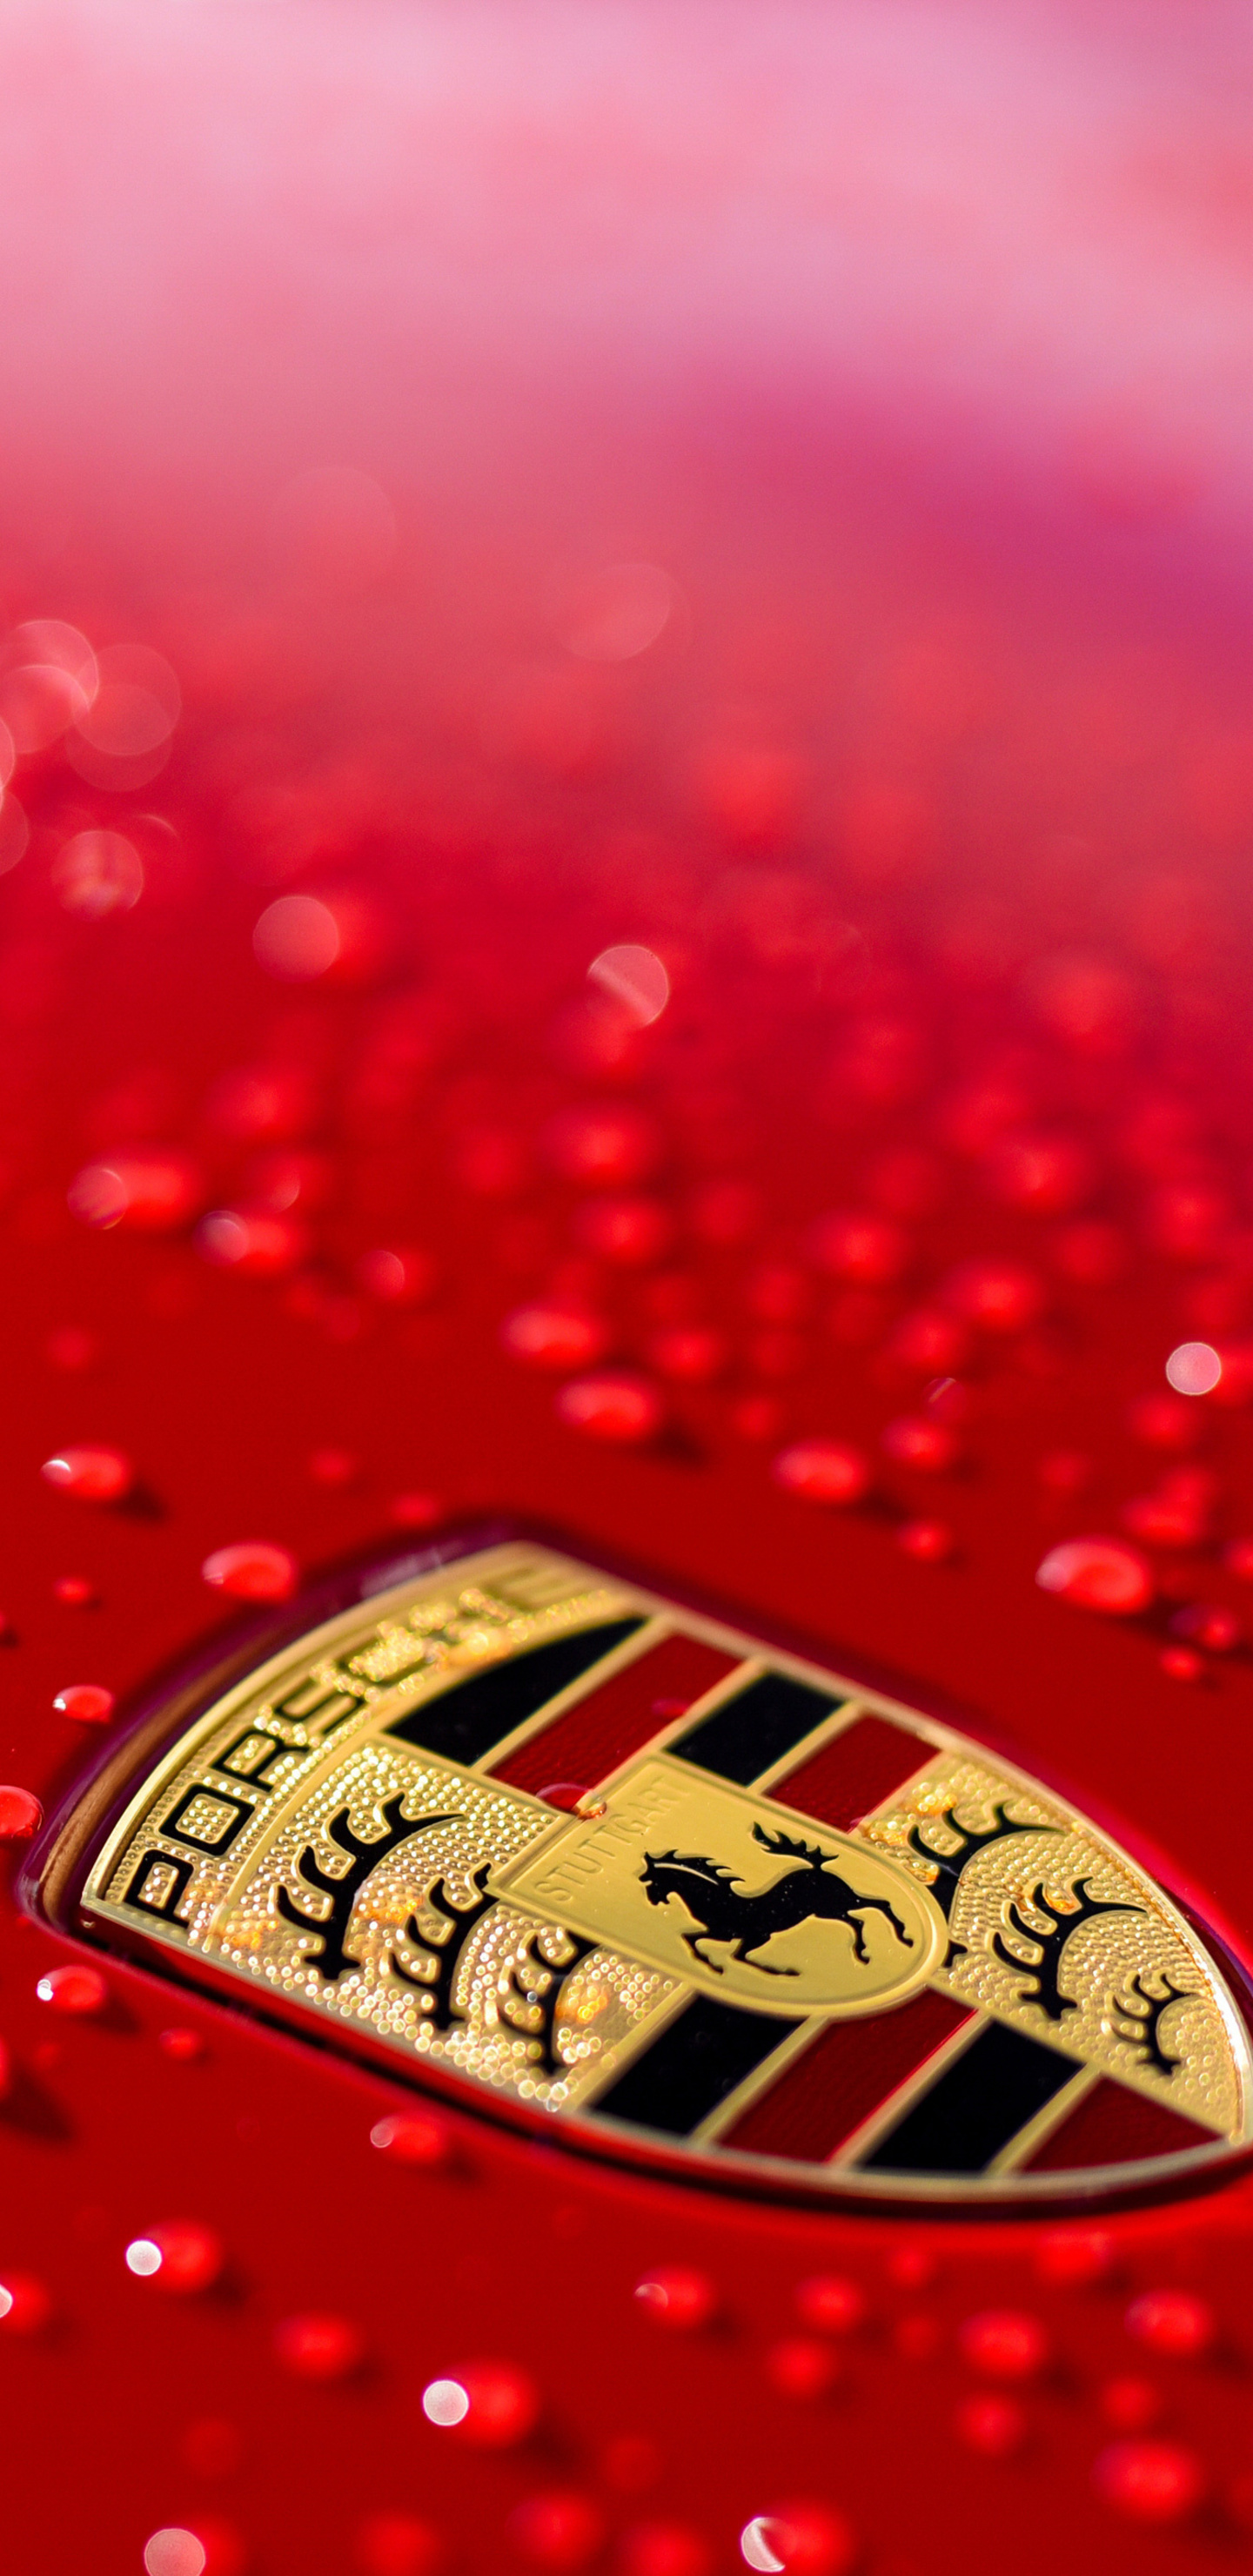 1440x2960 Porsche Logo 4k Samsung Galaxy Note 9 8 S9 S8 S8 Qhd Hd 4k Wallpapers Images Backgrounds Photos And Pictures